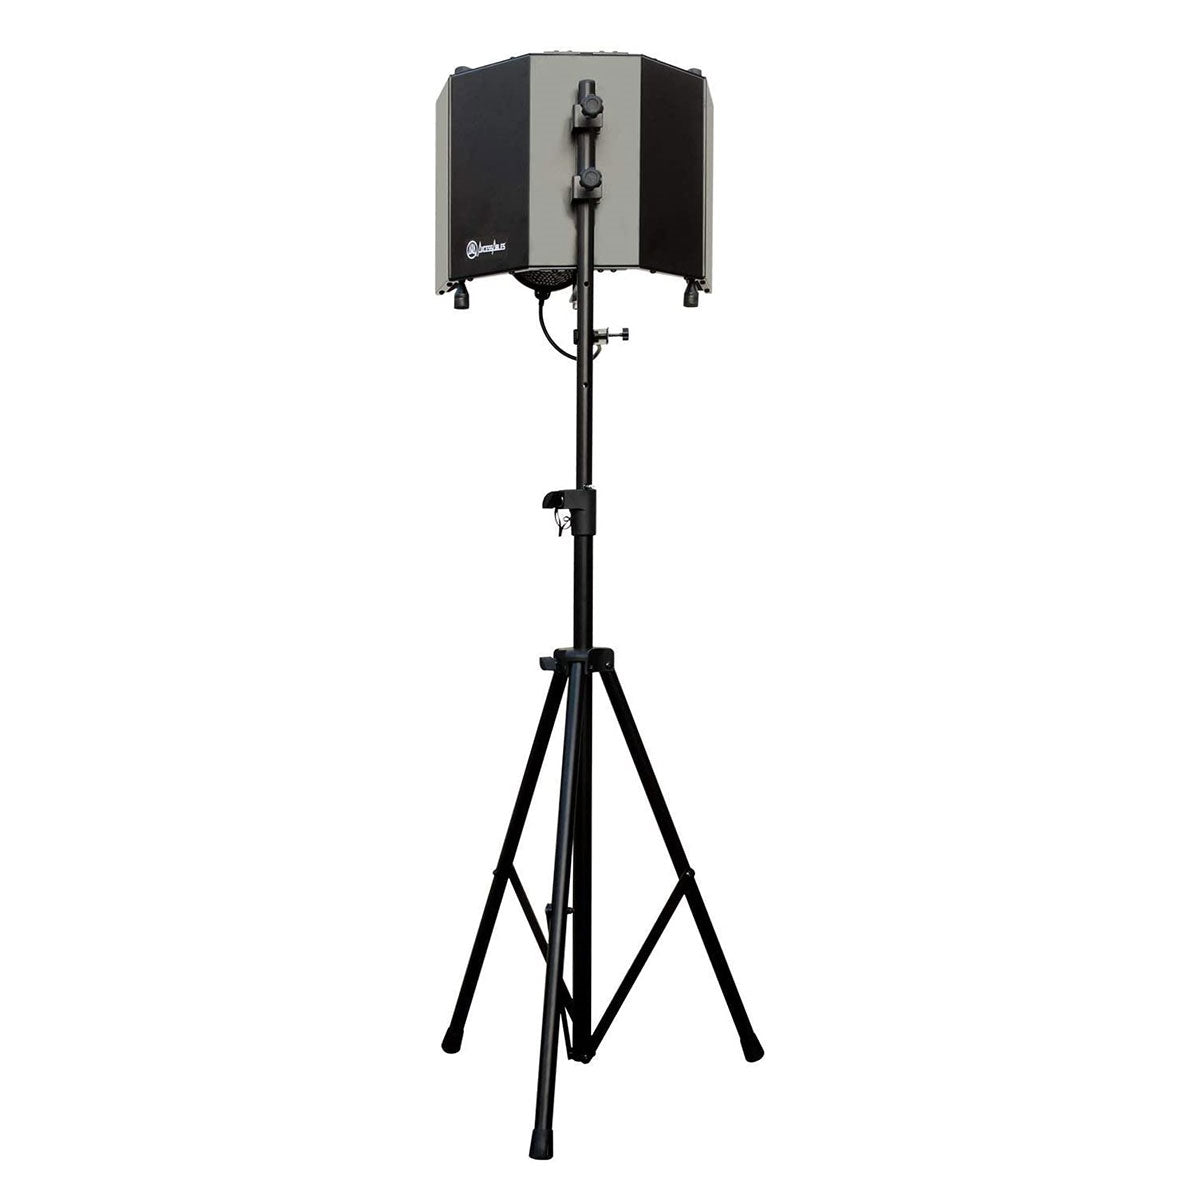 AxcessAbles Recording Studio Microphone Isolation Shield with Tripod Stand 4ft to 6ft 6" adjustable Mic Stand Recording booth, Podcast Sound booth. Compatible w/Blue Yeti, AT2020 (SF-101KIT ) - Open Box